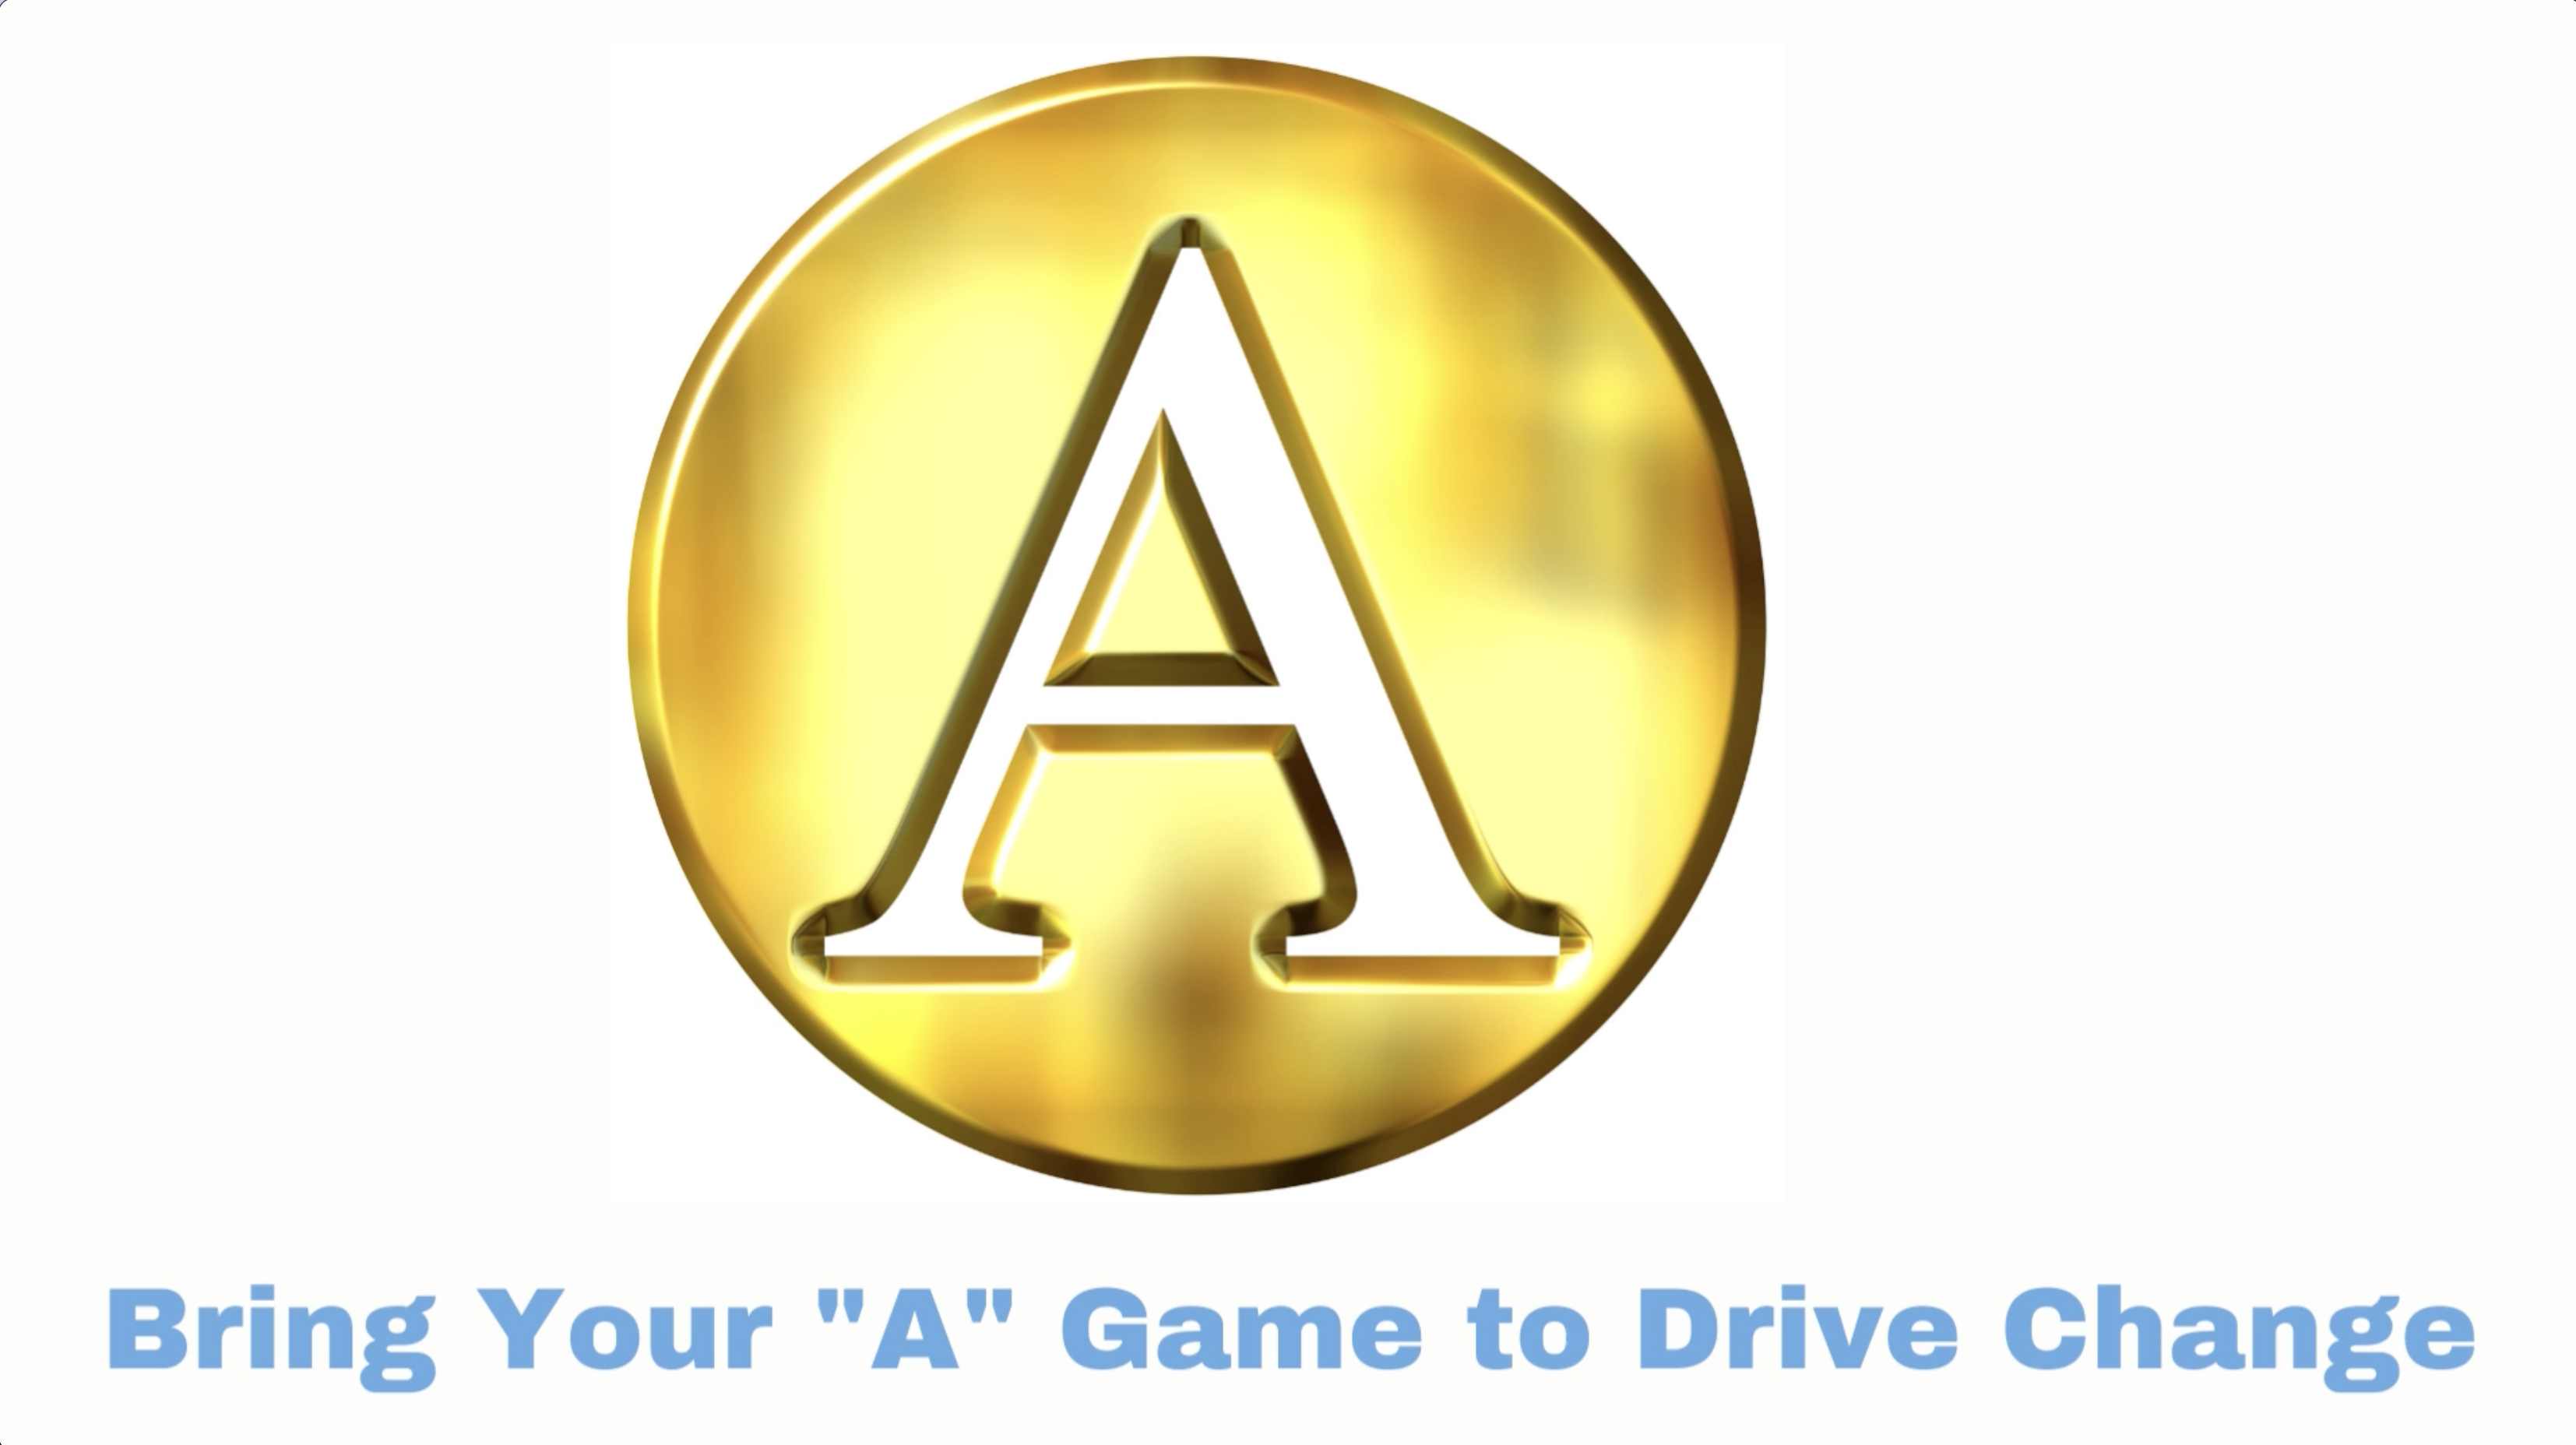 Bring Your "A" Game to Drive Change